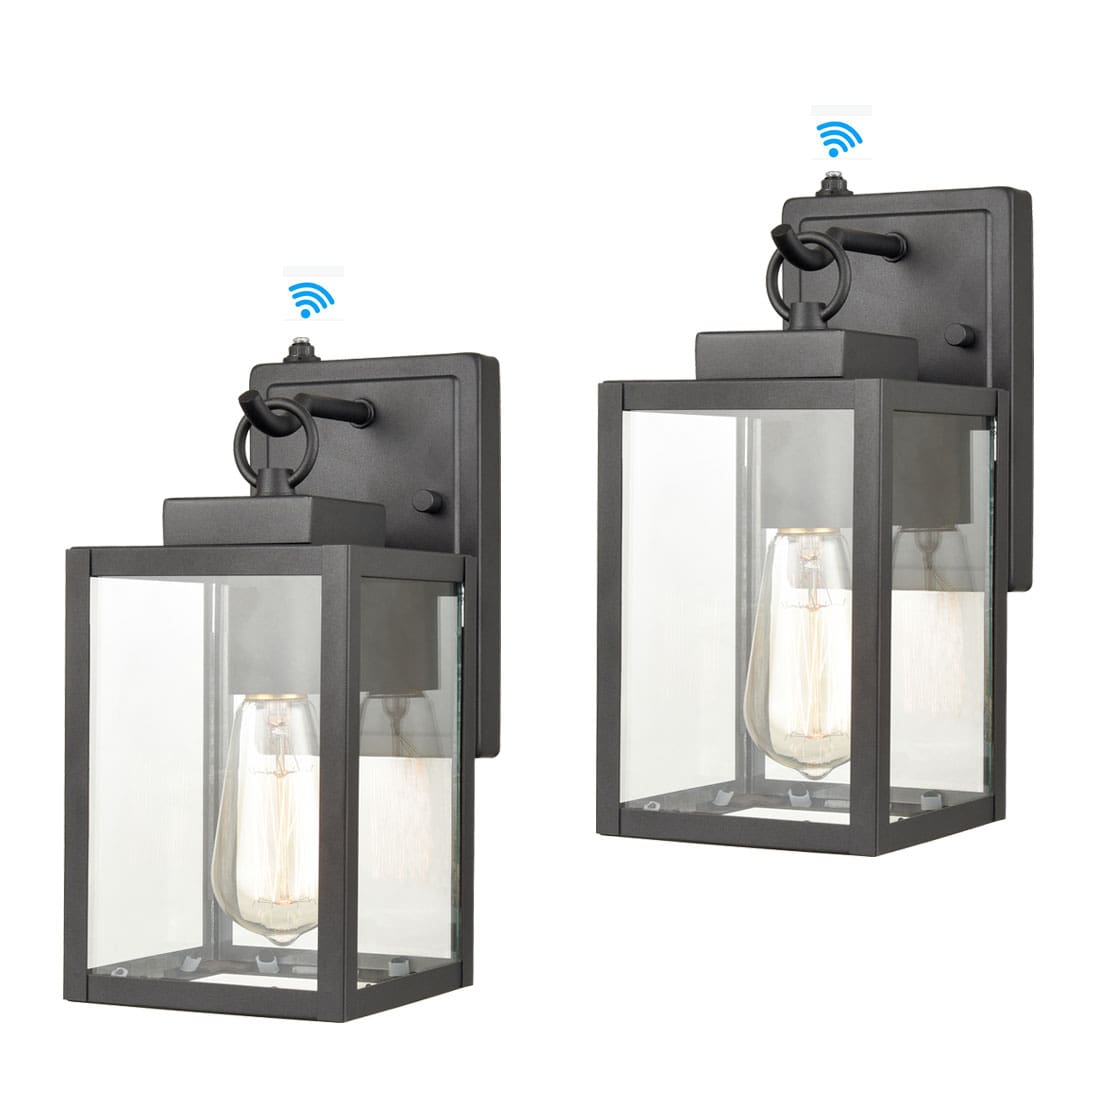 Set of Two Outdoor Porch Light Wall Light Dusk to Dawn